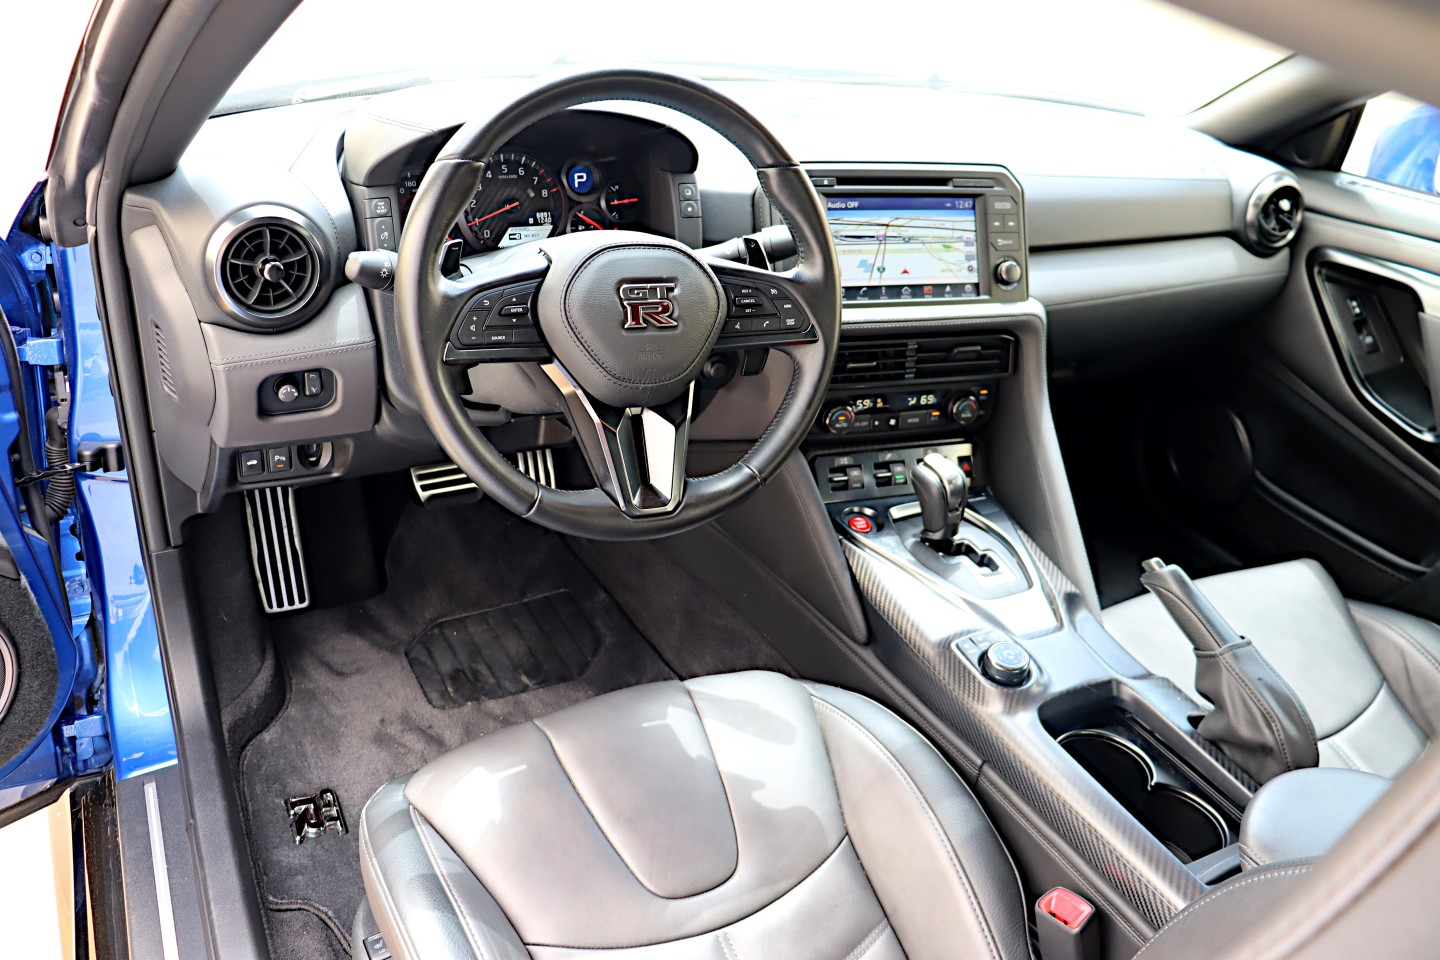 The cabin of the Nissan GT-R is all aimed at the driver and was considered pretty luxurious when this car debuted 12 years ago